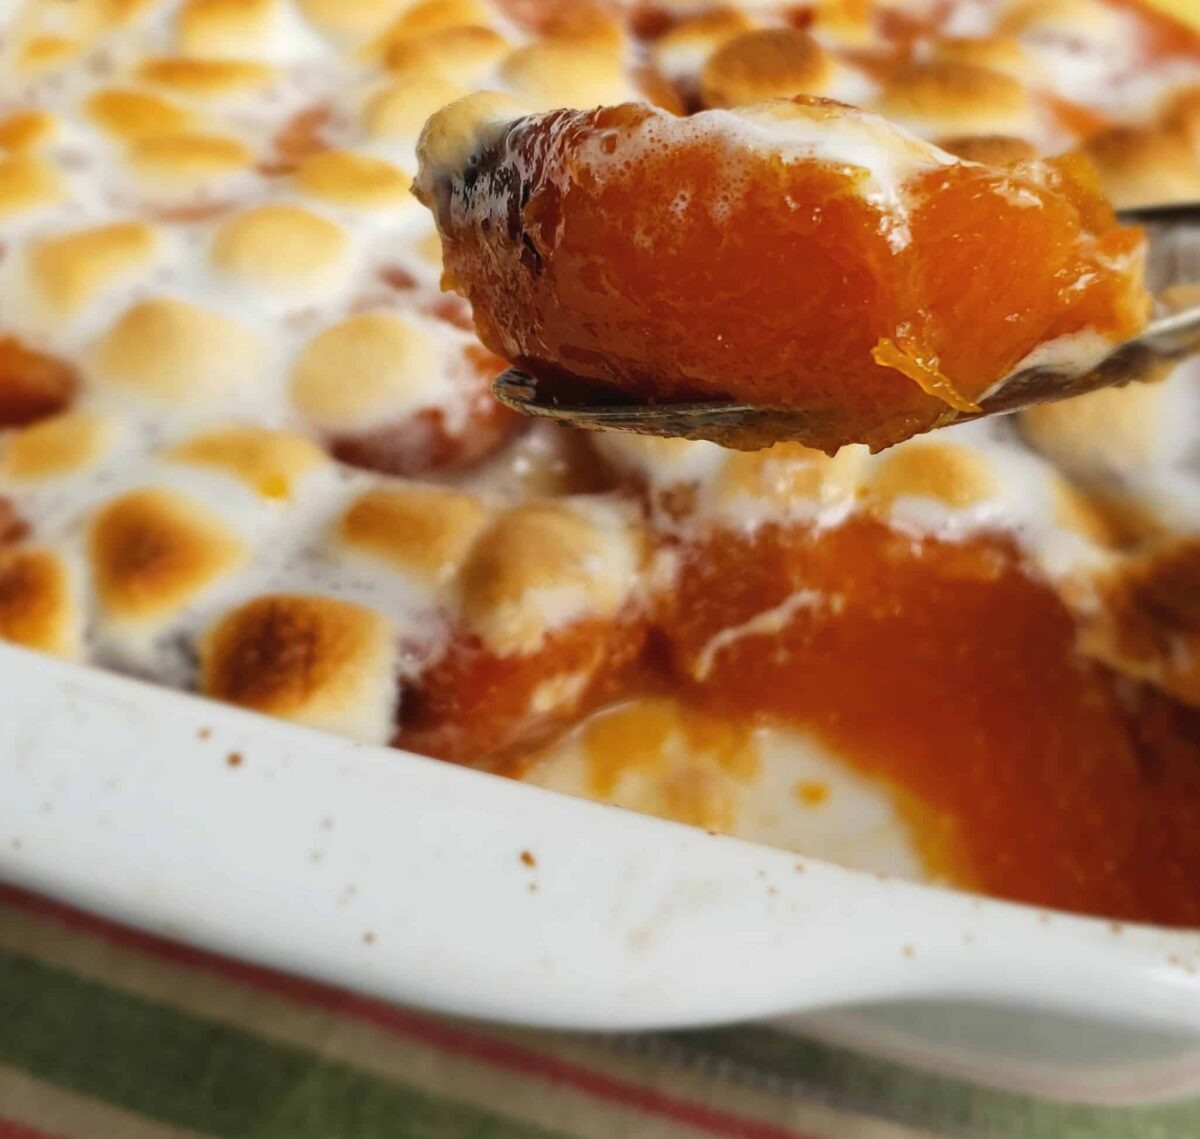 Spoonful of candied sweet potatoes lifted from white casserole dish